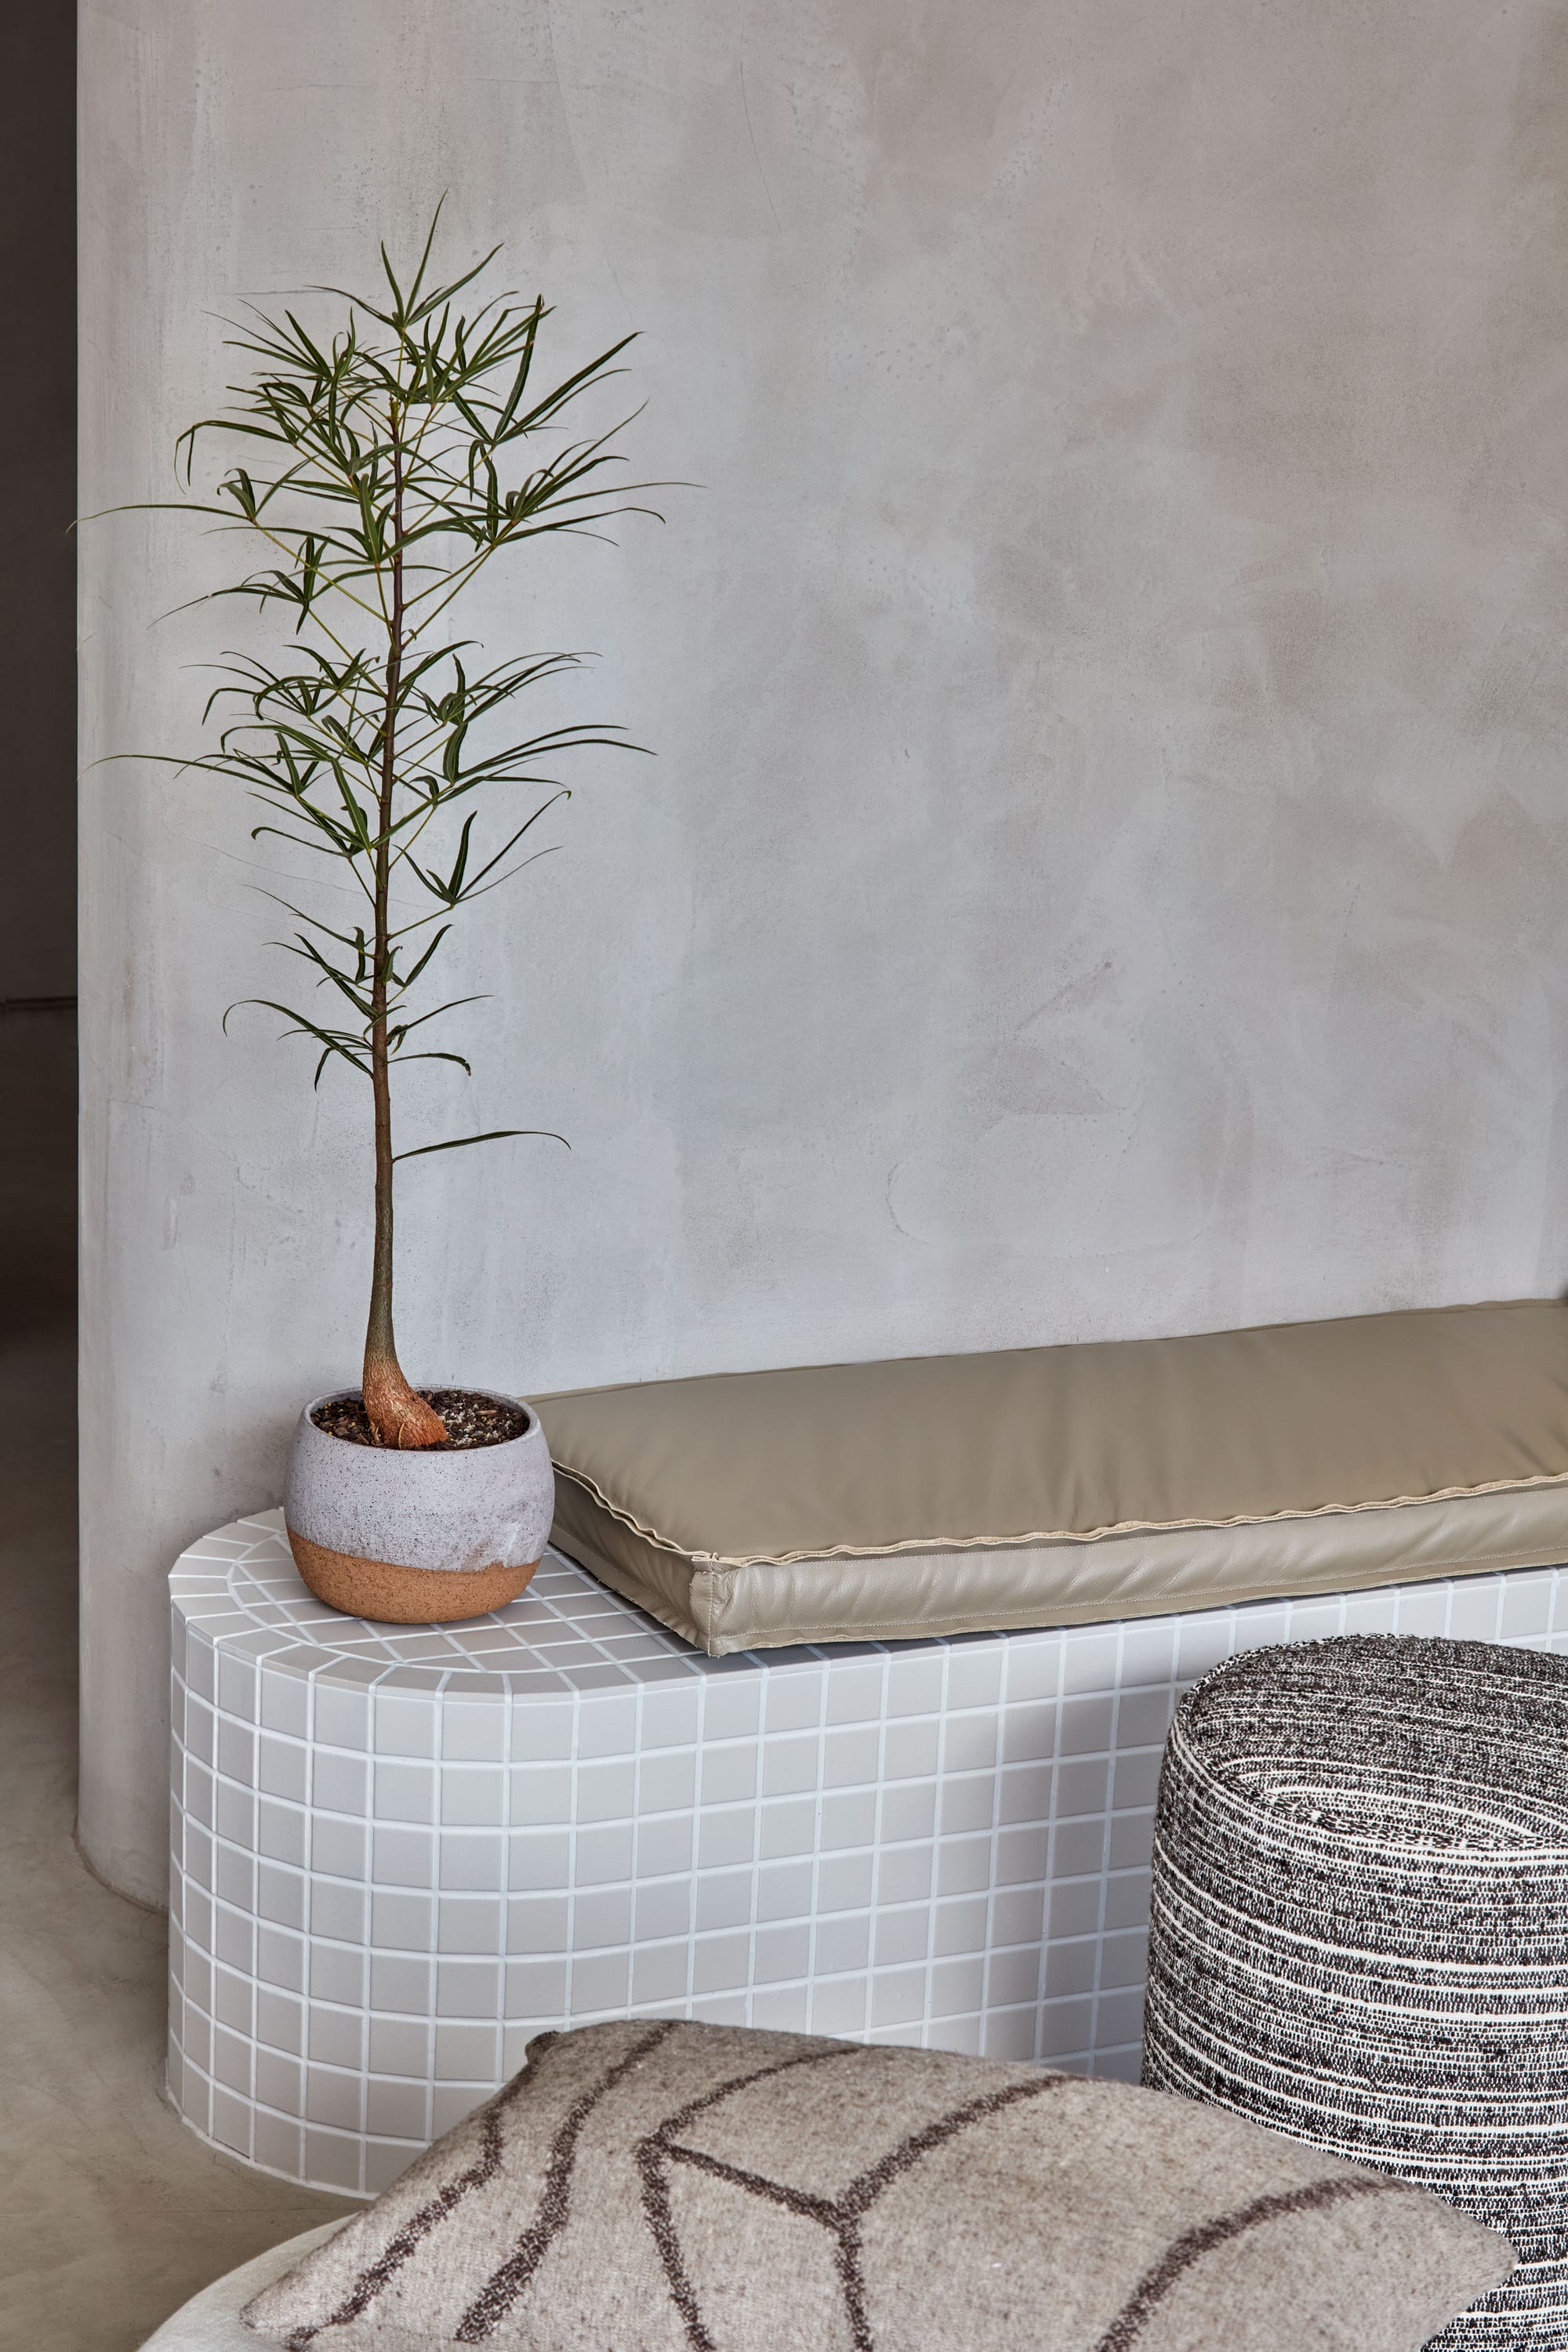 Zenn Showroom. Photography by Elisa Watson. Tiled curved bench seat with beige leather cushion. Small potted plant. Grey plaster walls. 